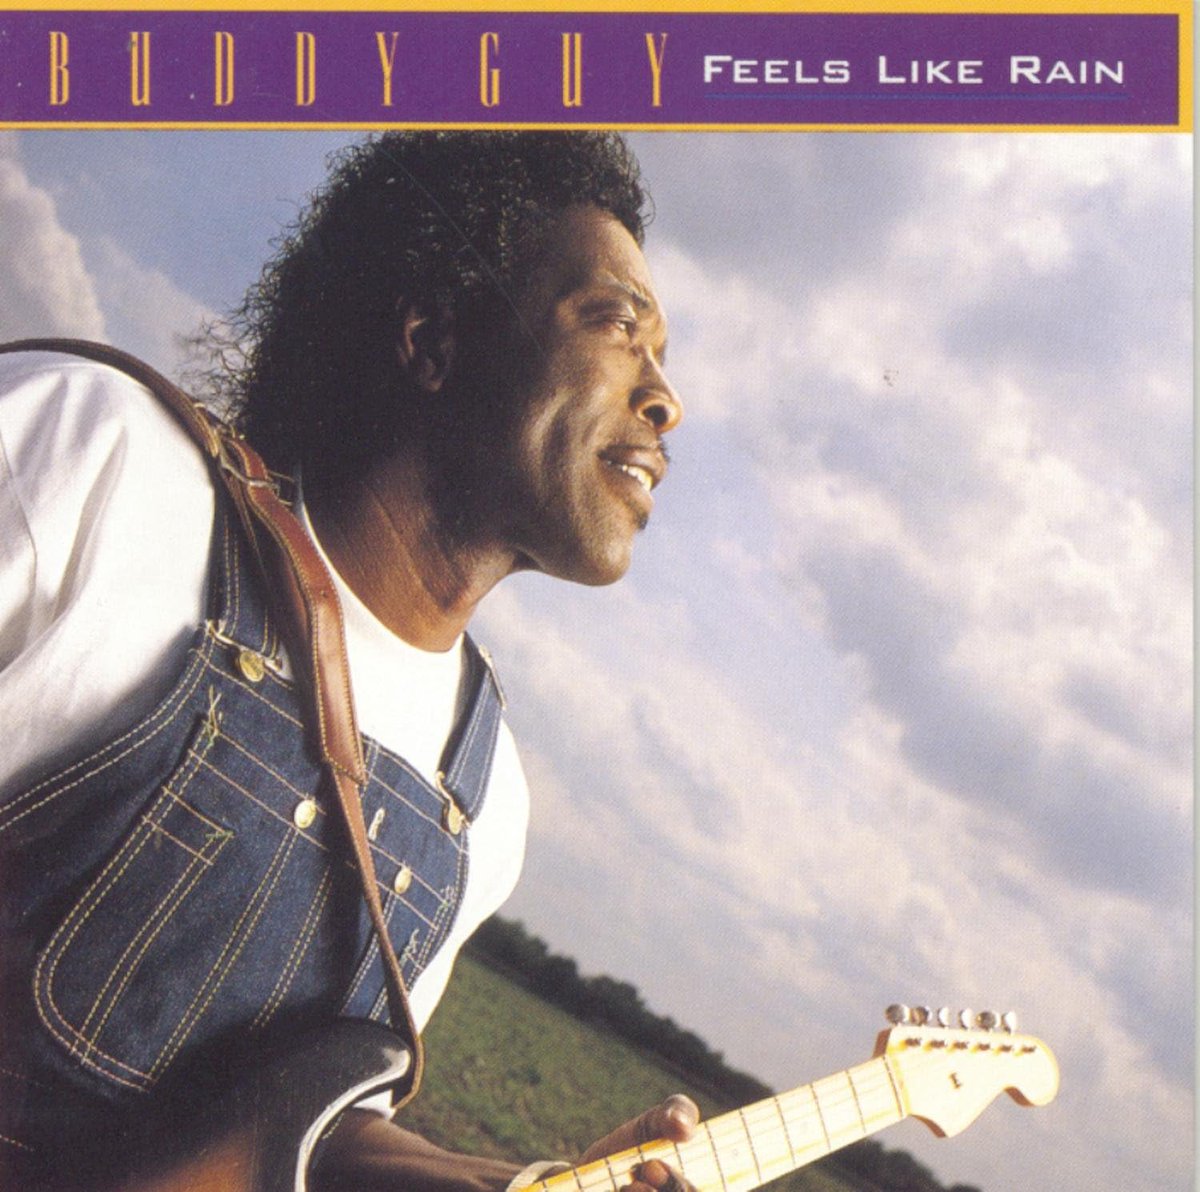 Buddy Guy - Feels Like Rain, 1993  

Is an album by Buddy Guy, released in 1993 through Silvertone Records.  The album earned Guy the Grammy Award for Best Contemporary Blues Album.